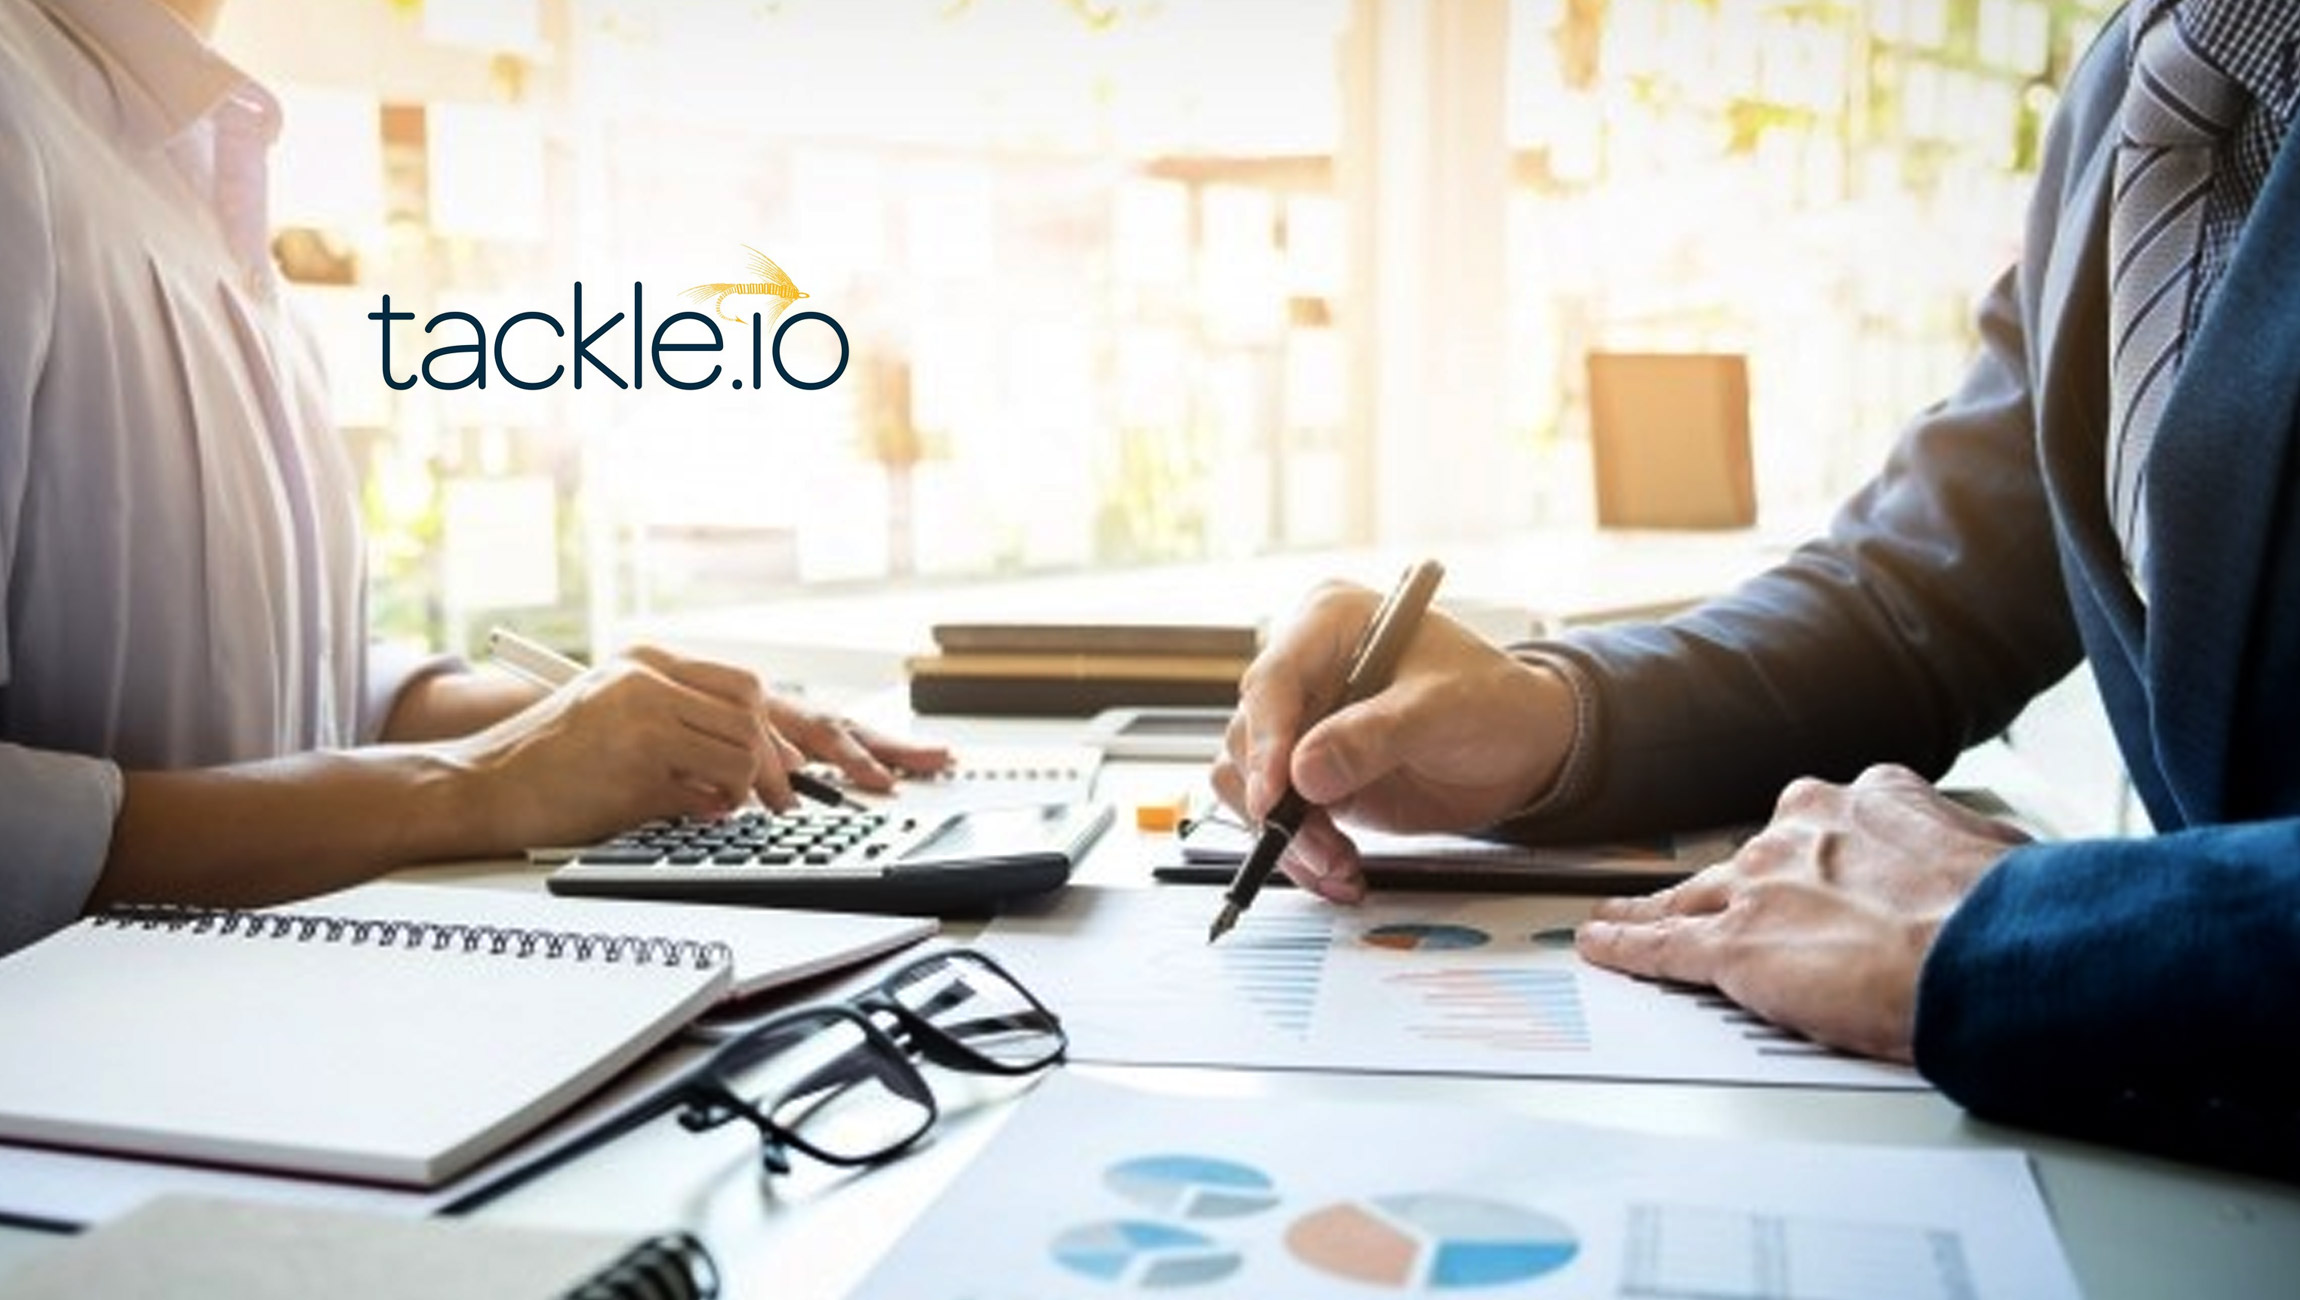 Tackle.io expands its offering to be the first and only platform to help software companies build and scale their Cloud GTM to accelerate sales growth